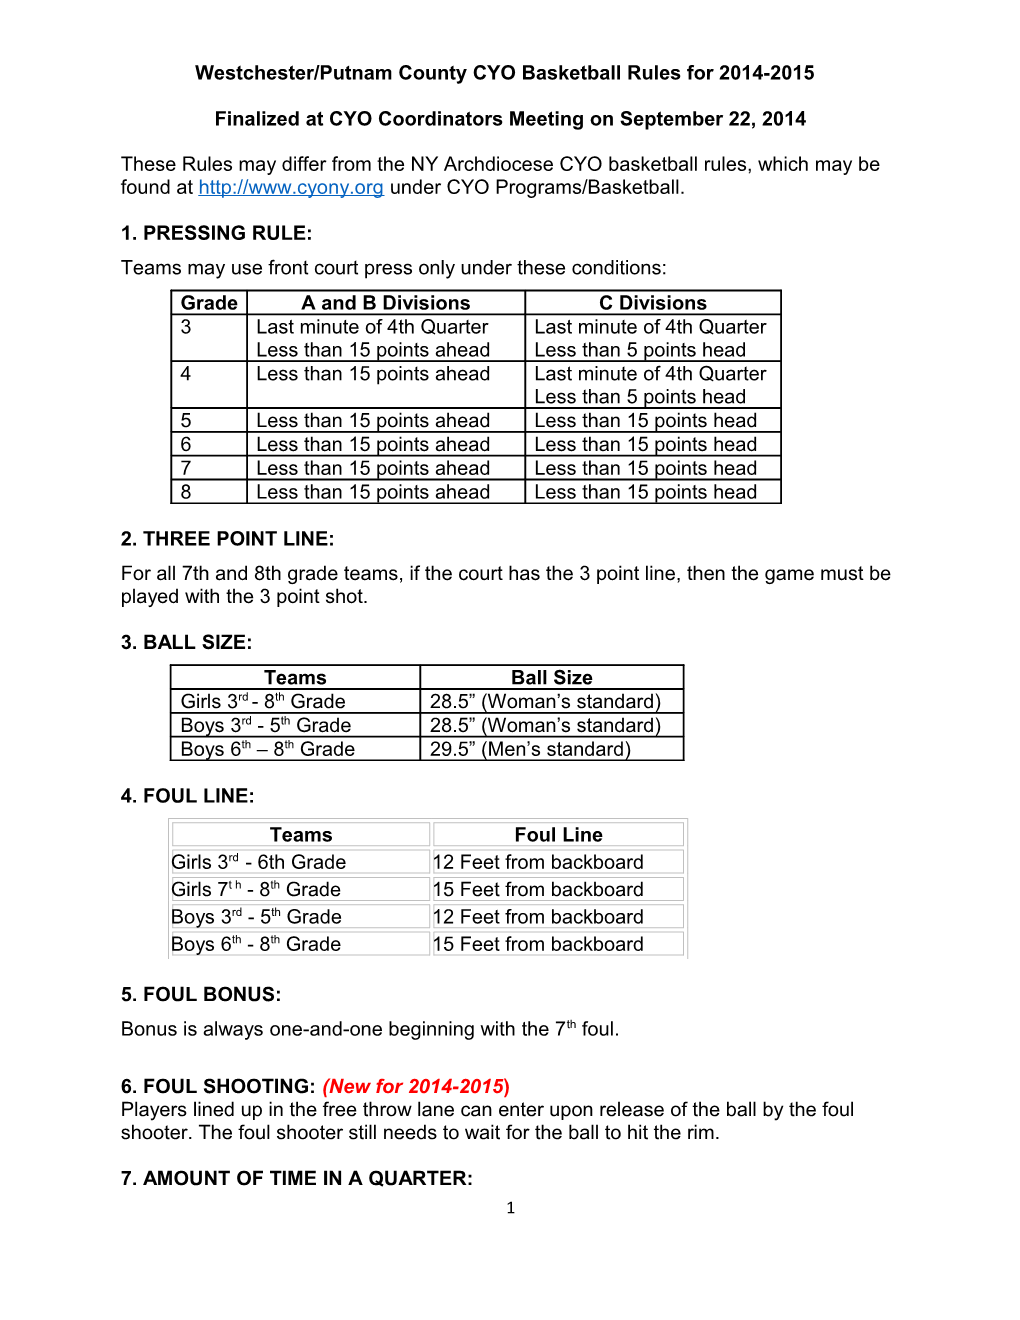 Westchester/Putnam County CYO Basketball Rules for 2014-2015